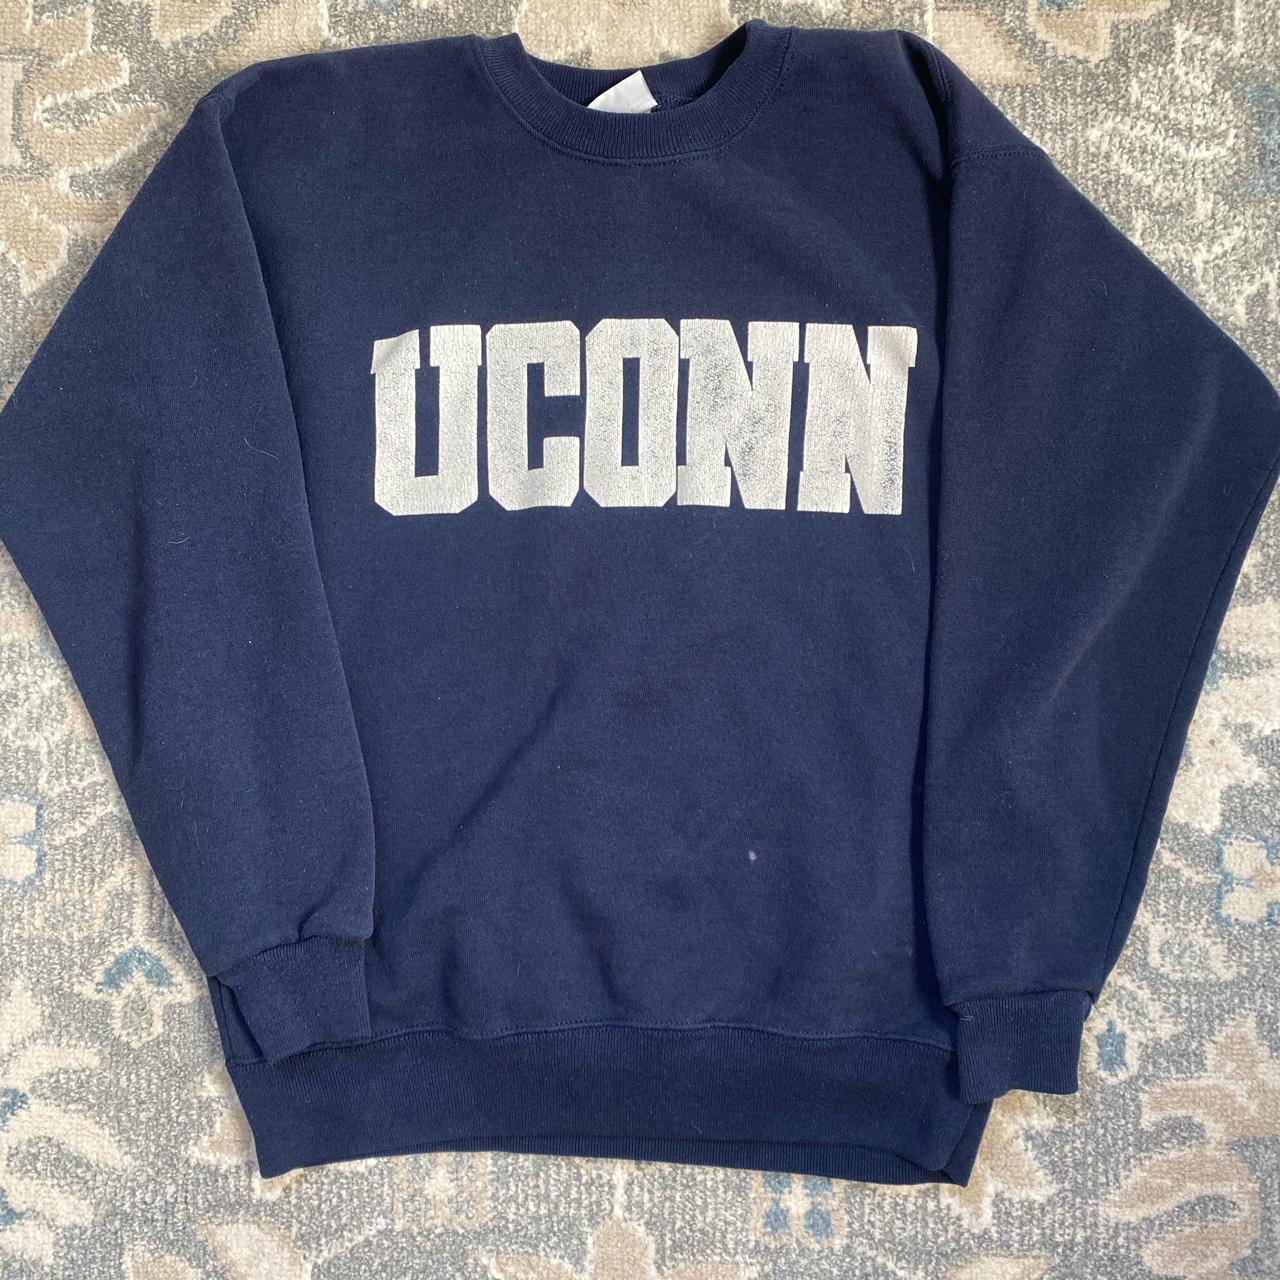 cozy vintage Uconn sweater size large small flaw... - Depop